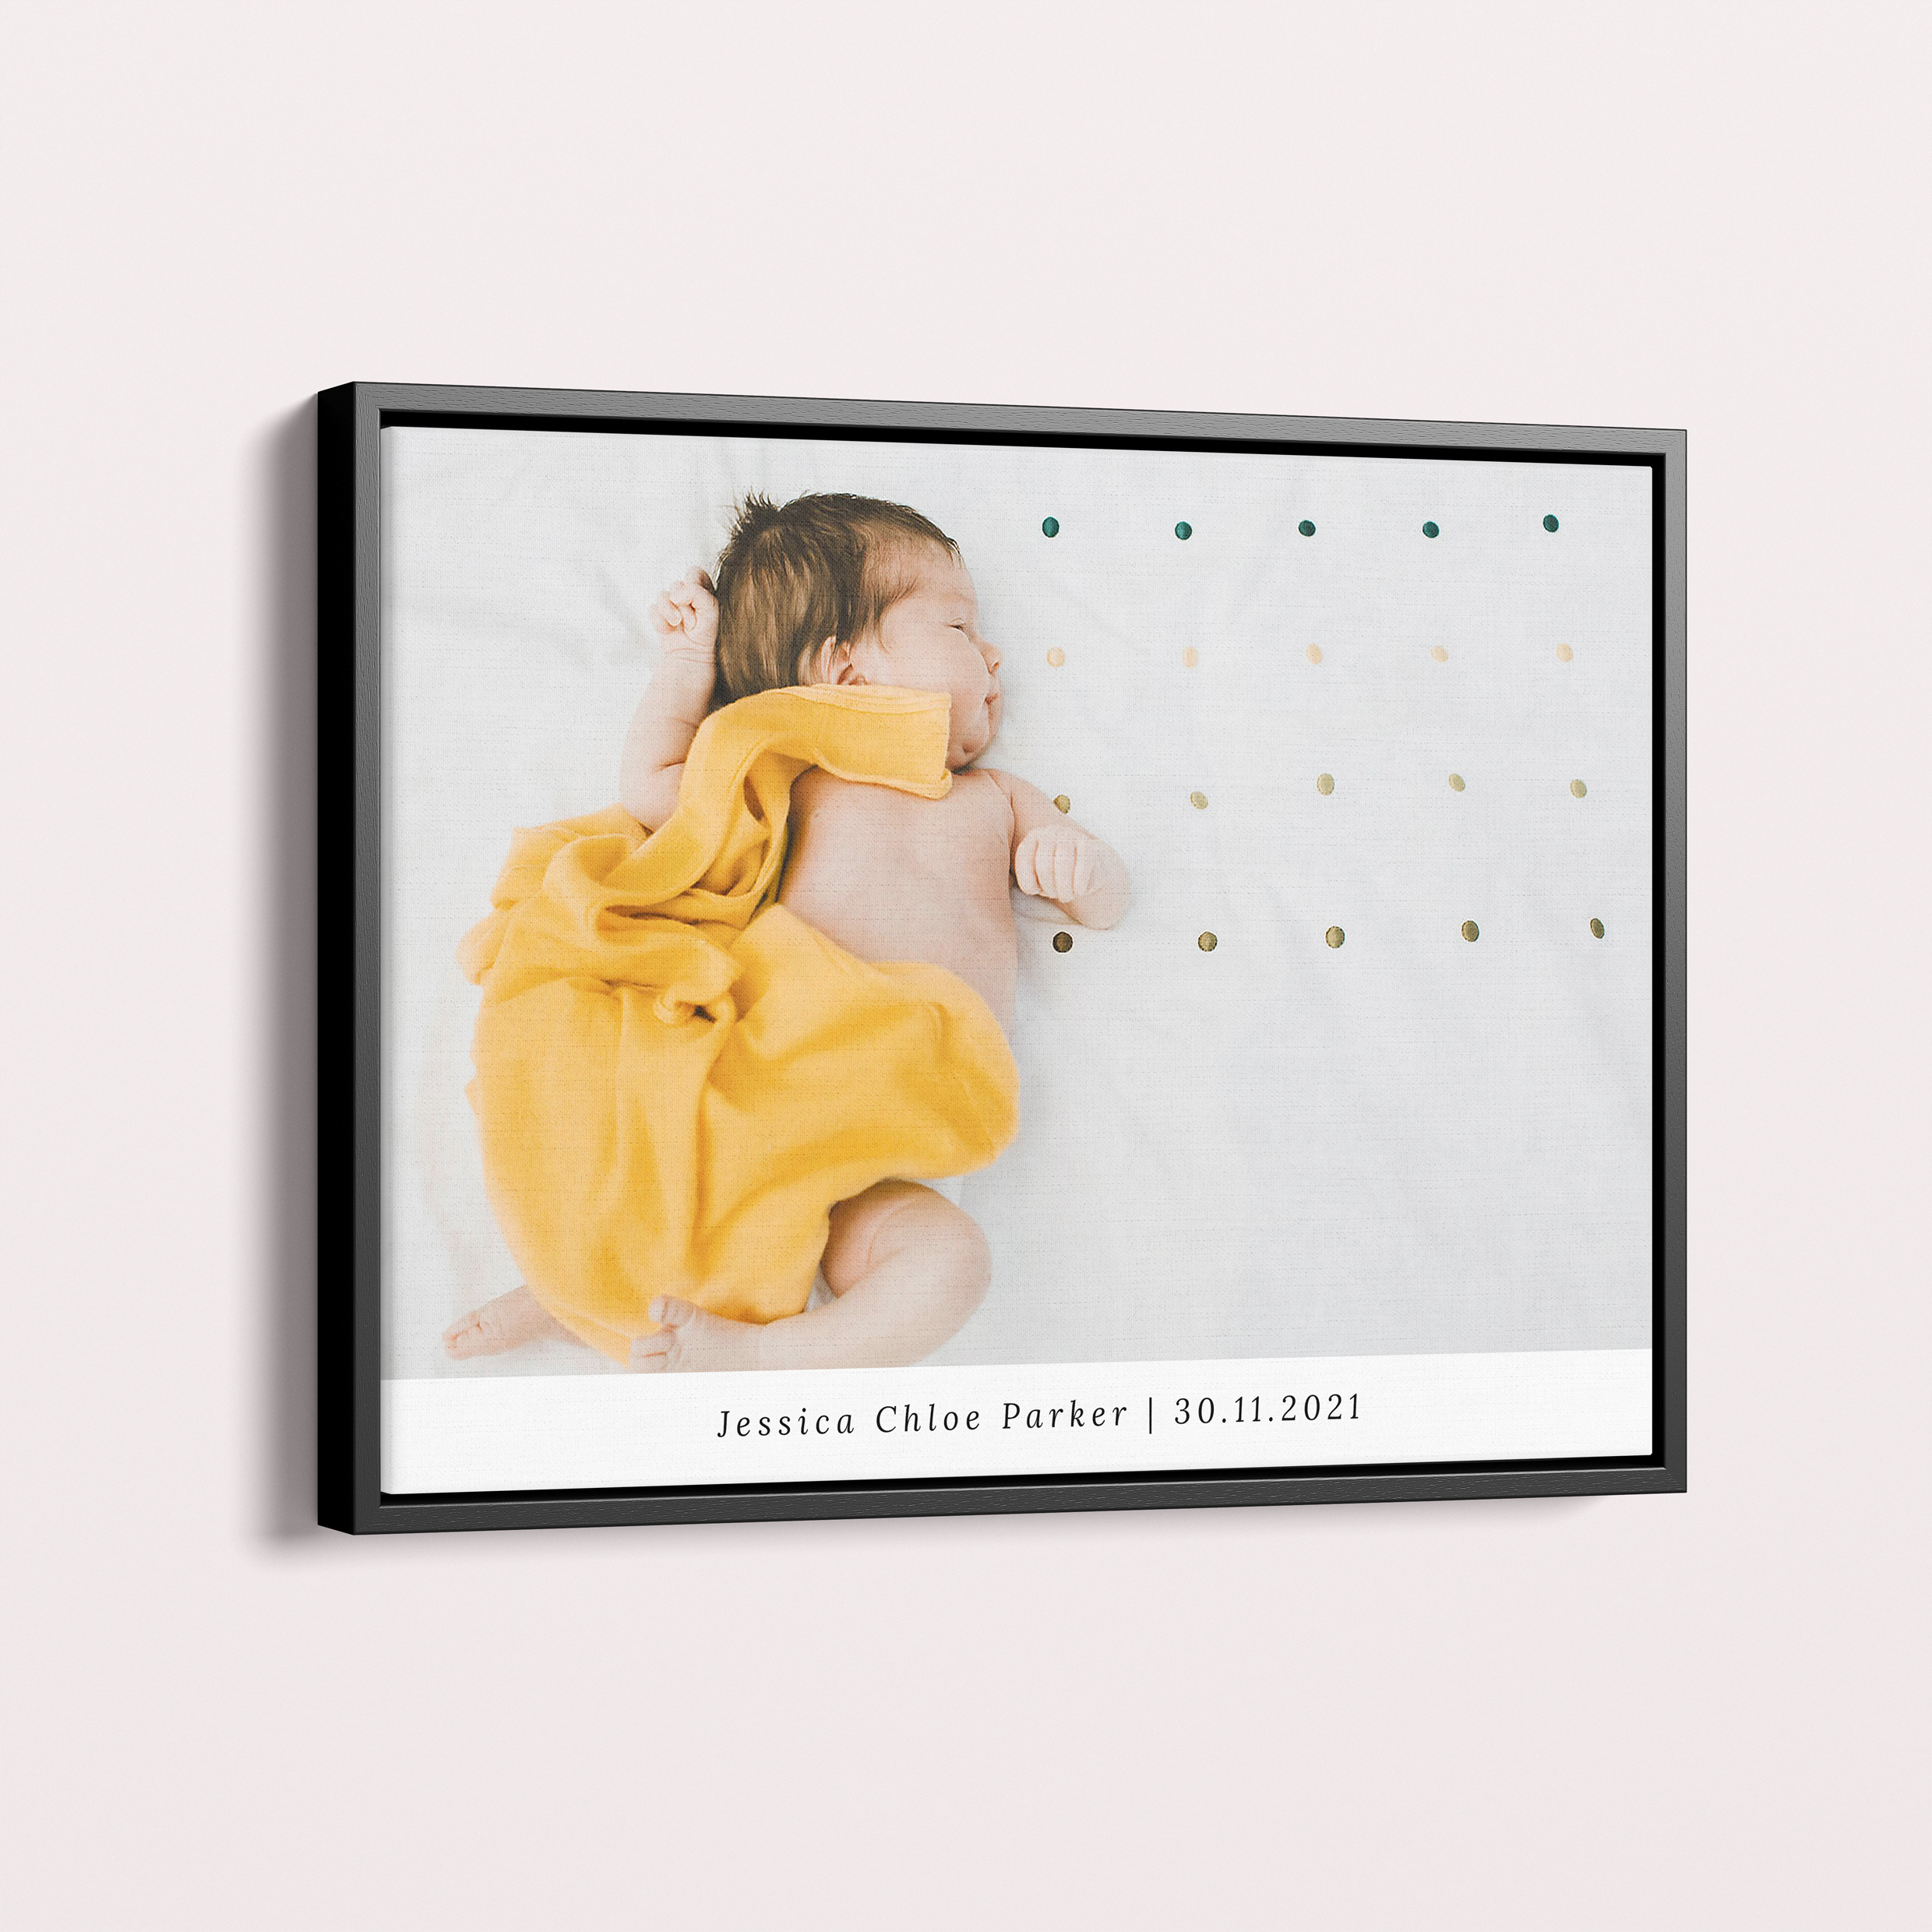 Personalised Baby's Day Out Framed Photo Canvas - Preserve Joyful Memories with Utterly Printable